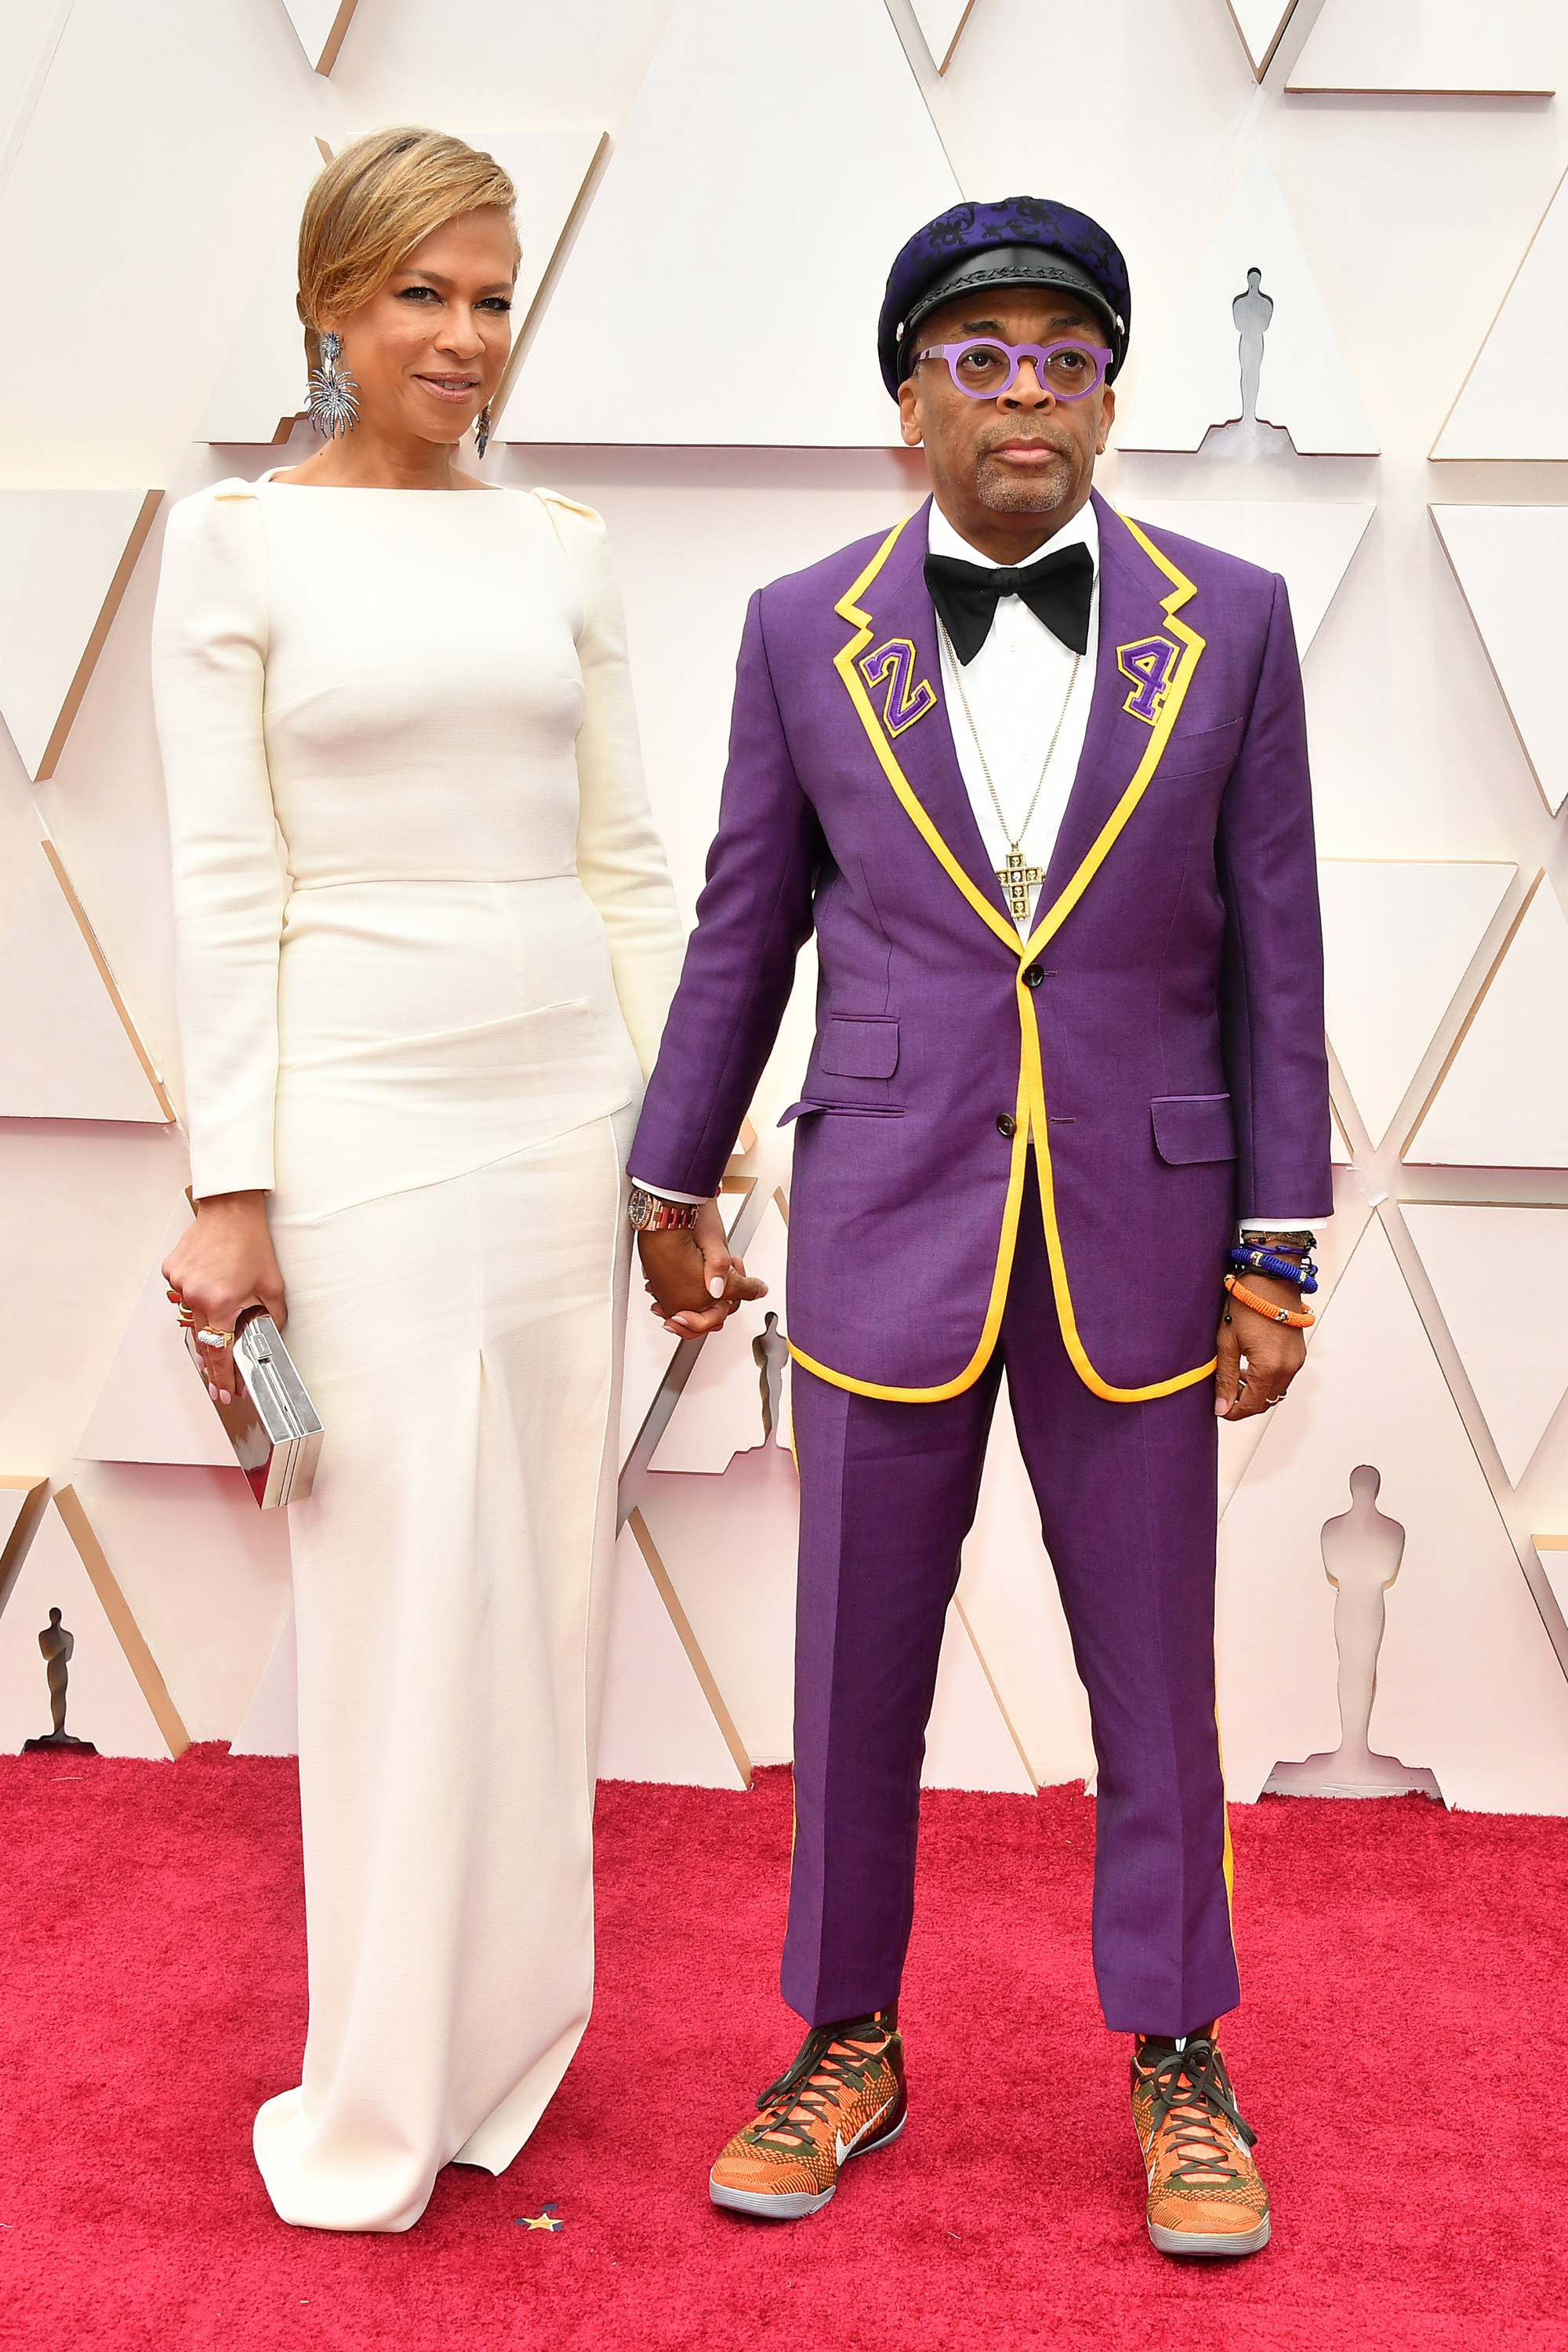 Spike Lee wears Kobe Bryant tribute suit to the Oscars - CNN Style